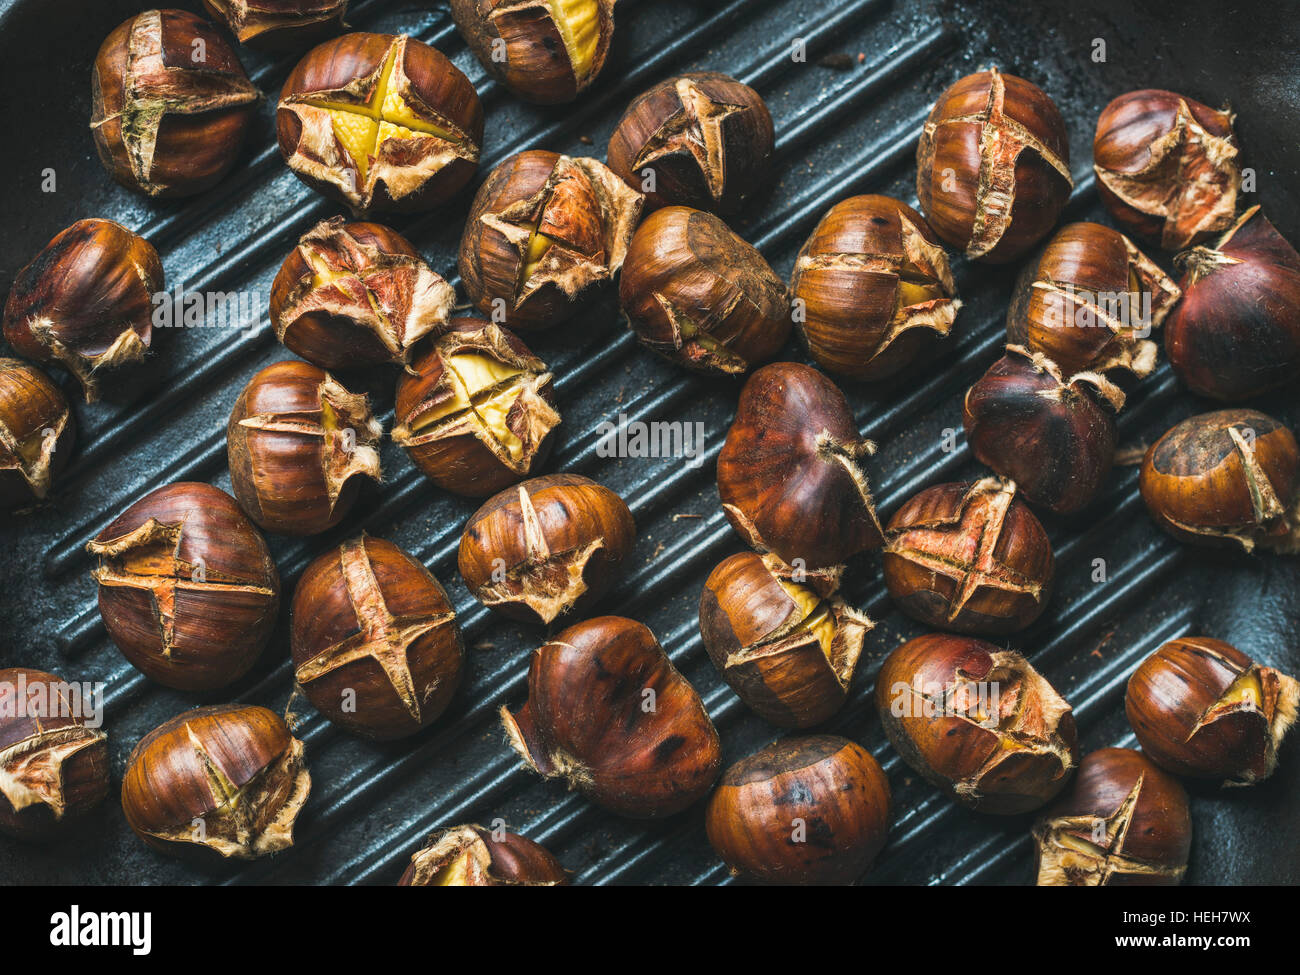 Close-up of roasted chestnuts over black cast iron grilling pan surface, top view, horizontal composition Stock Photo